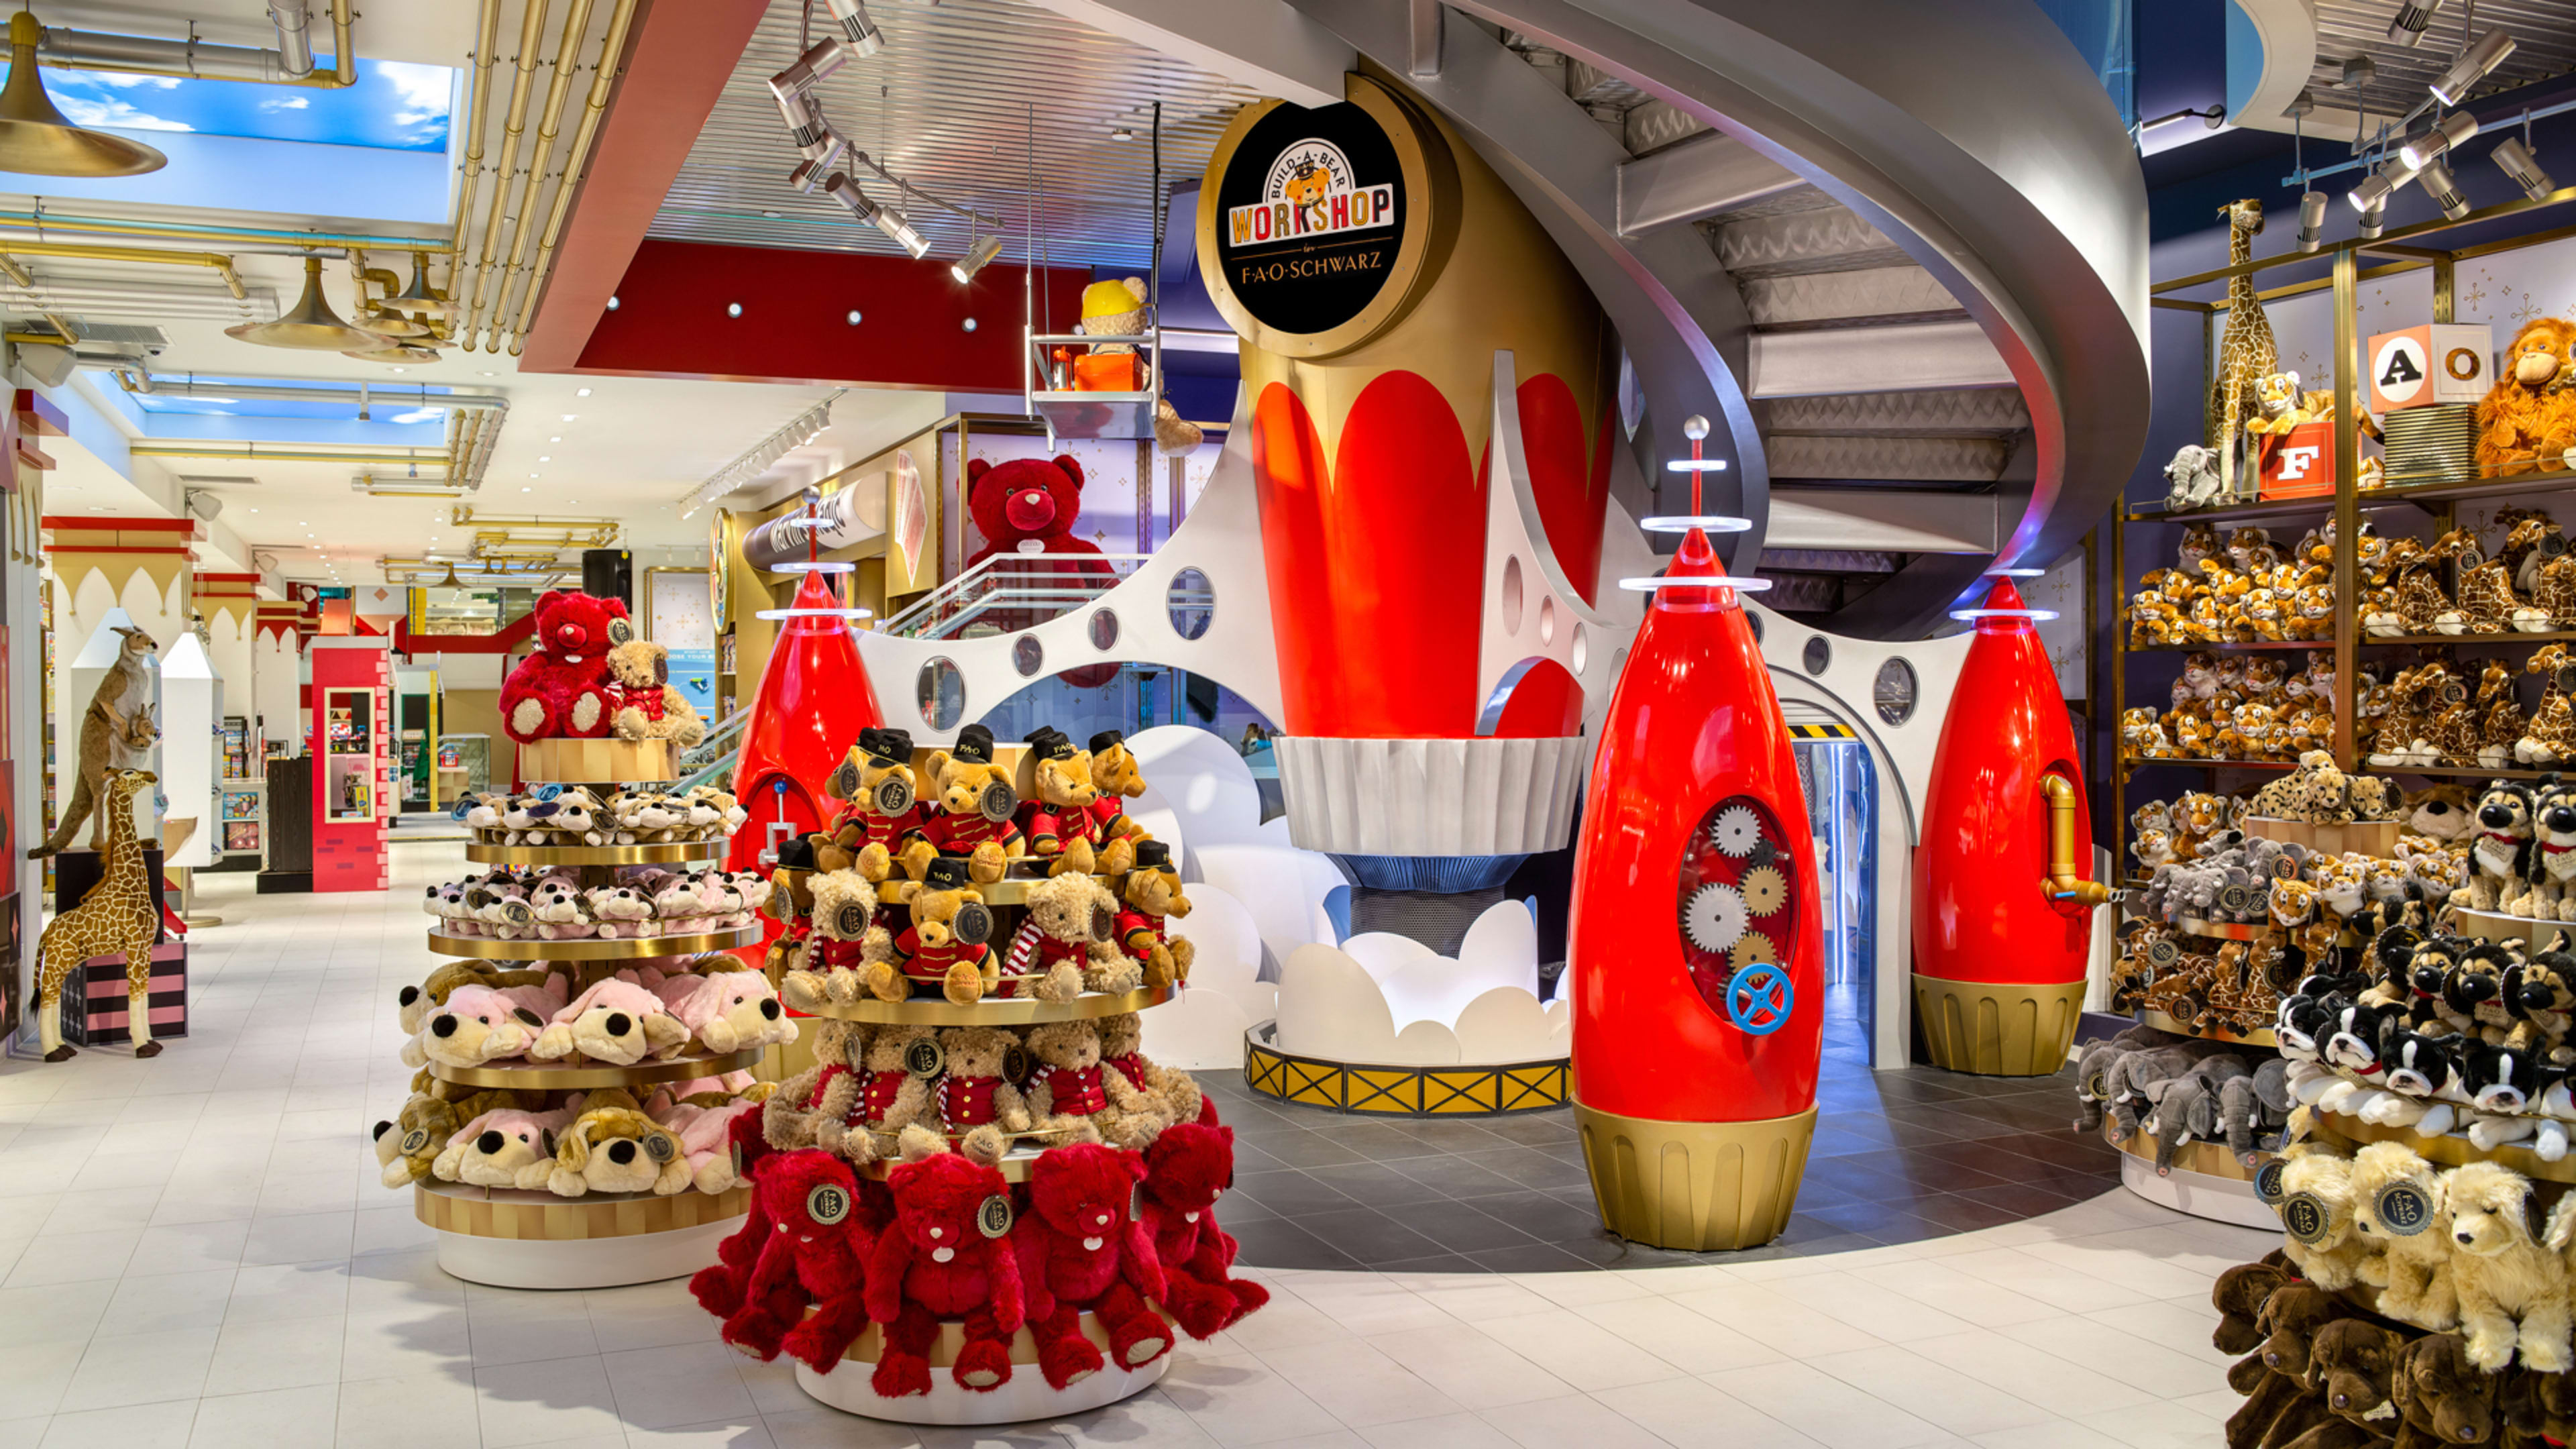 FAO Schwarz is back! Check out these festive images of its new NYC flagship